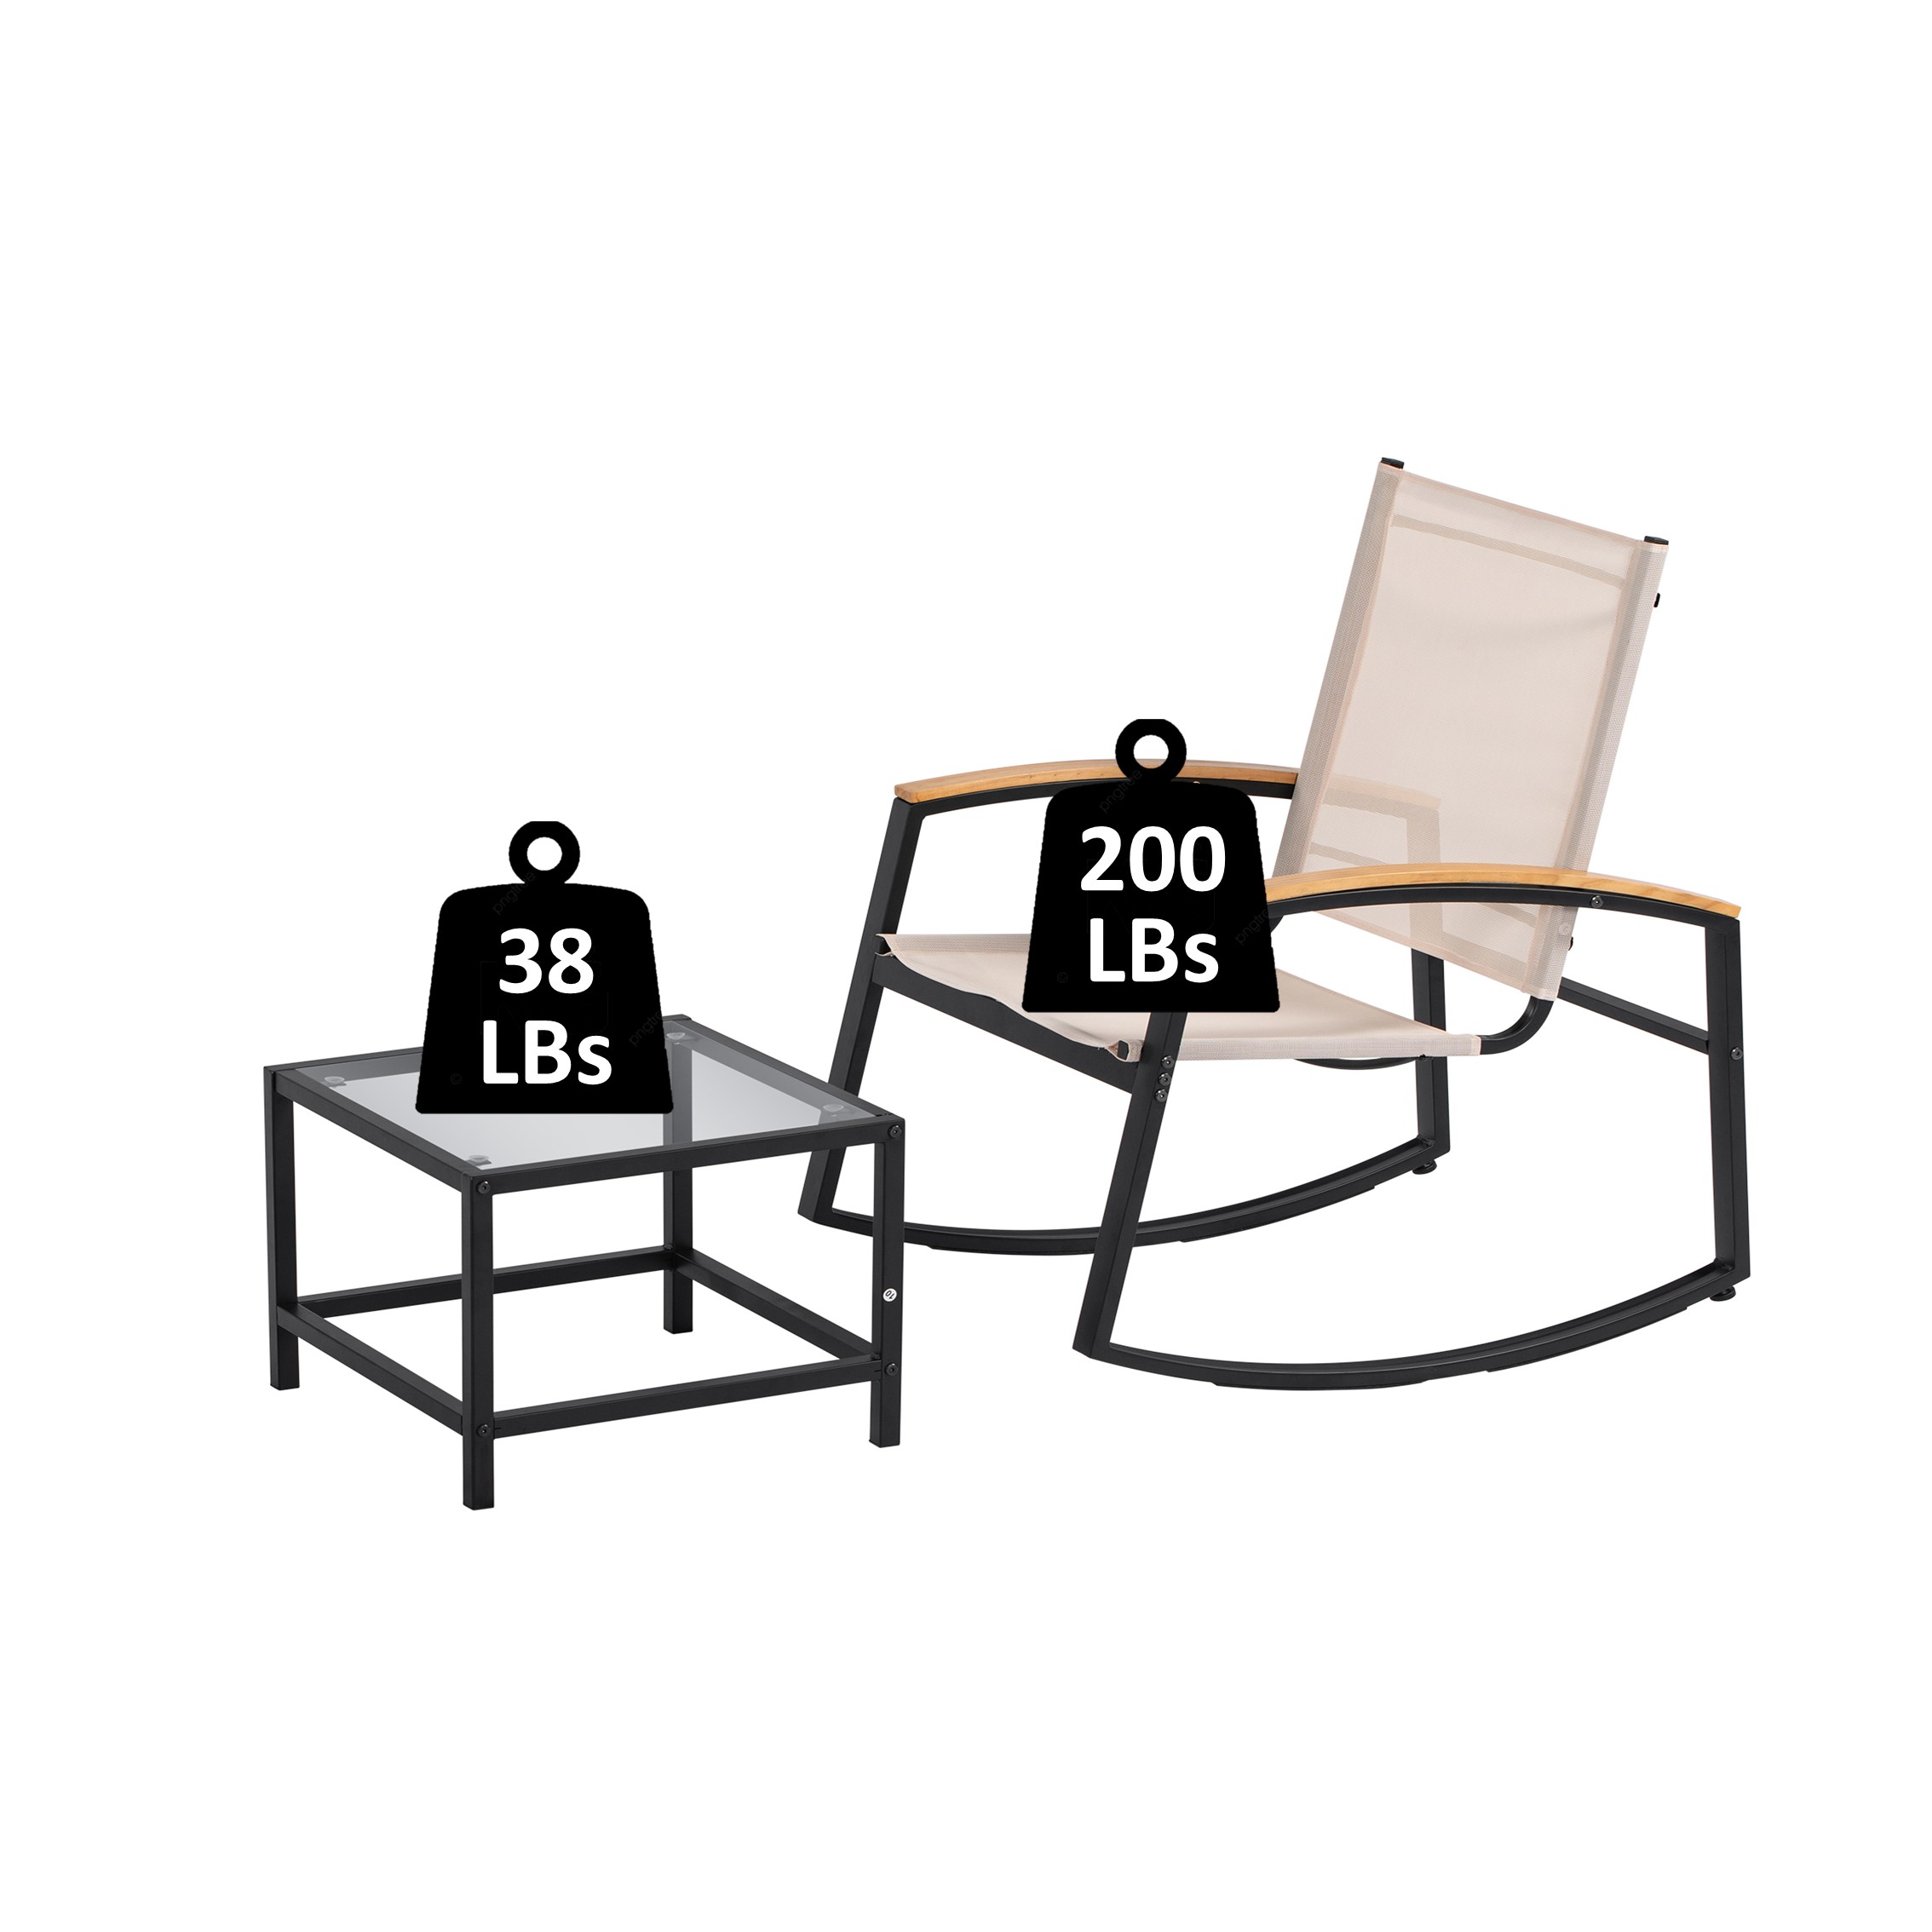 3-Piece Outdoor Patio Bistro Set, Patio Furniture Sets with 2 Rocking Metal Chairs and Glass Coffee Table, Textilene Fabric Small Patio Furniture Set for Yard, Garden, Balcony, Poolside - image 4 of 7